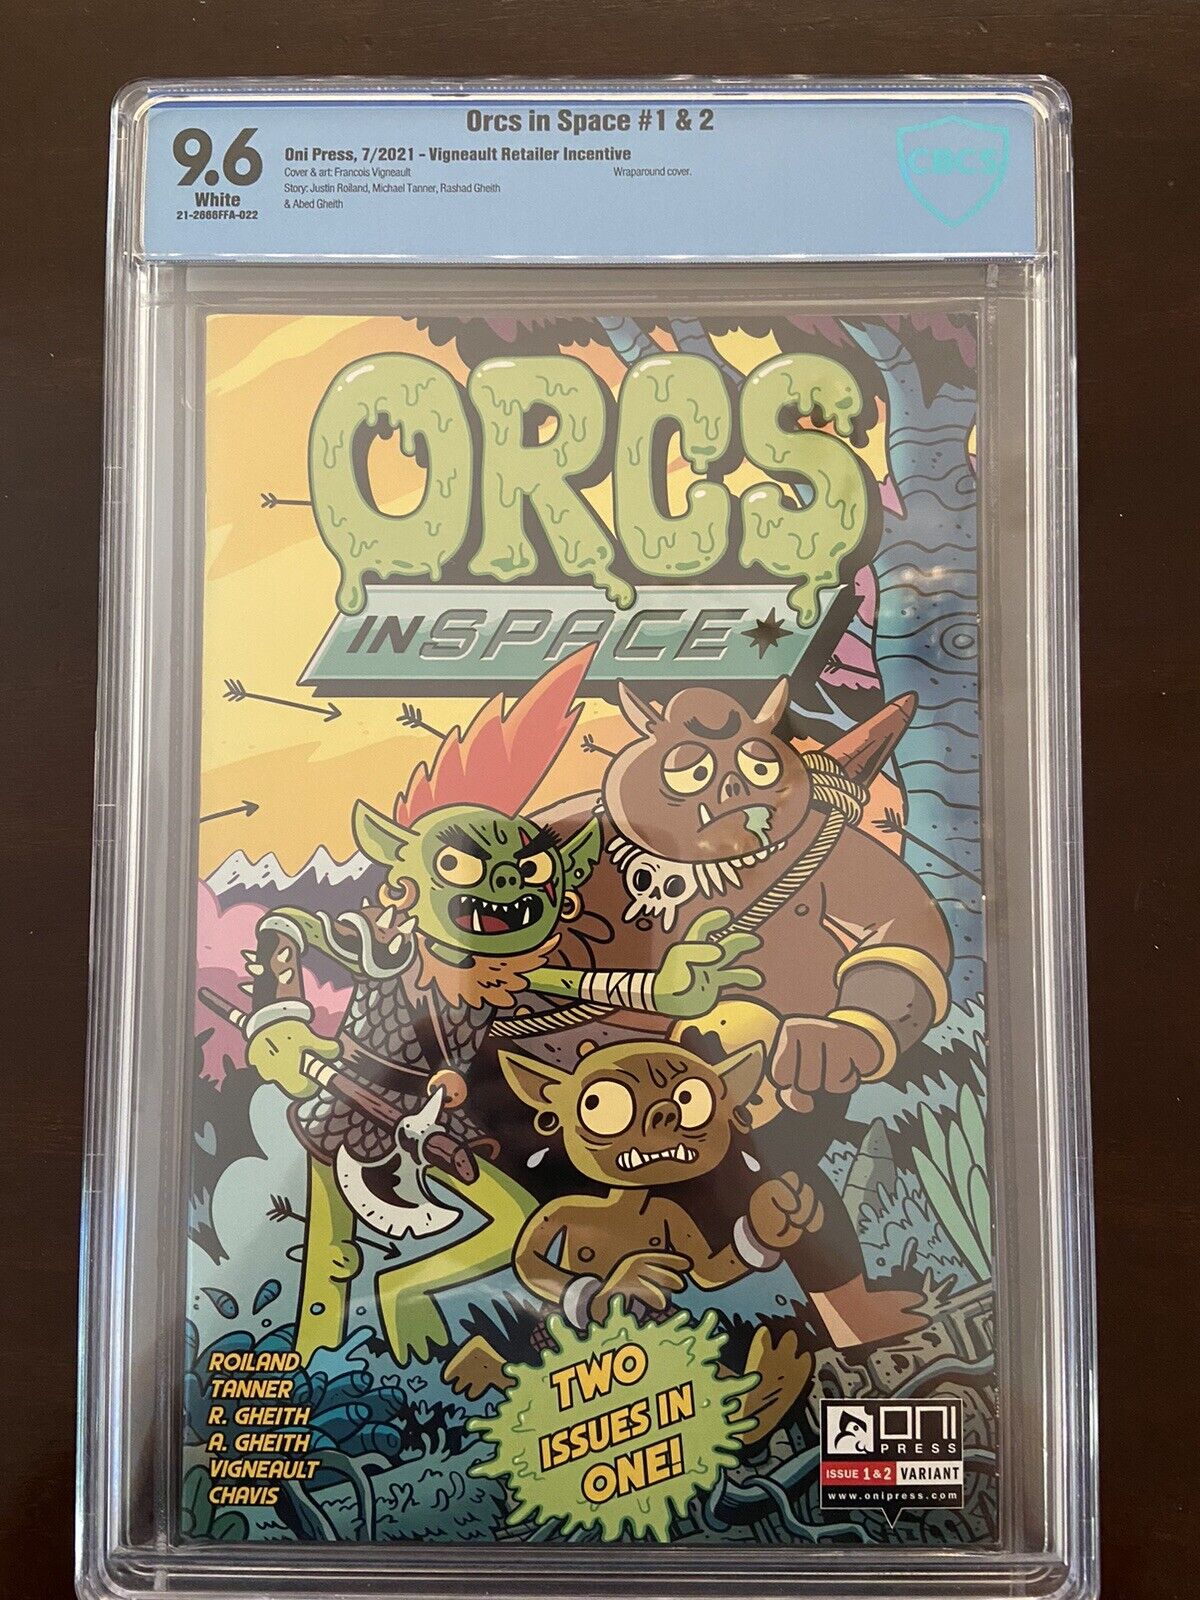 Orcs in Space #1&2C  Oni Press-Vigneault Retailer Incentive. Graded 9.6 CBCS